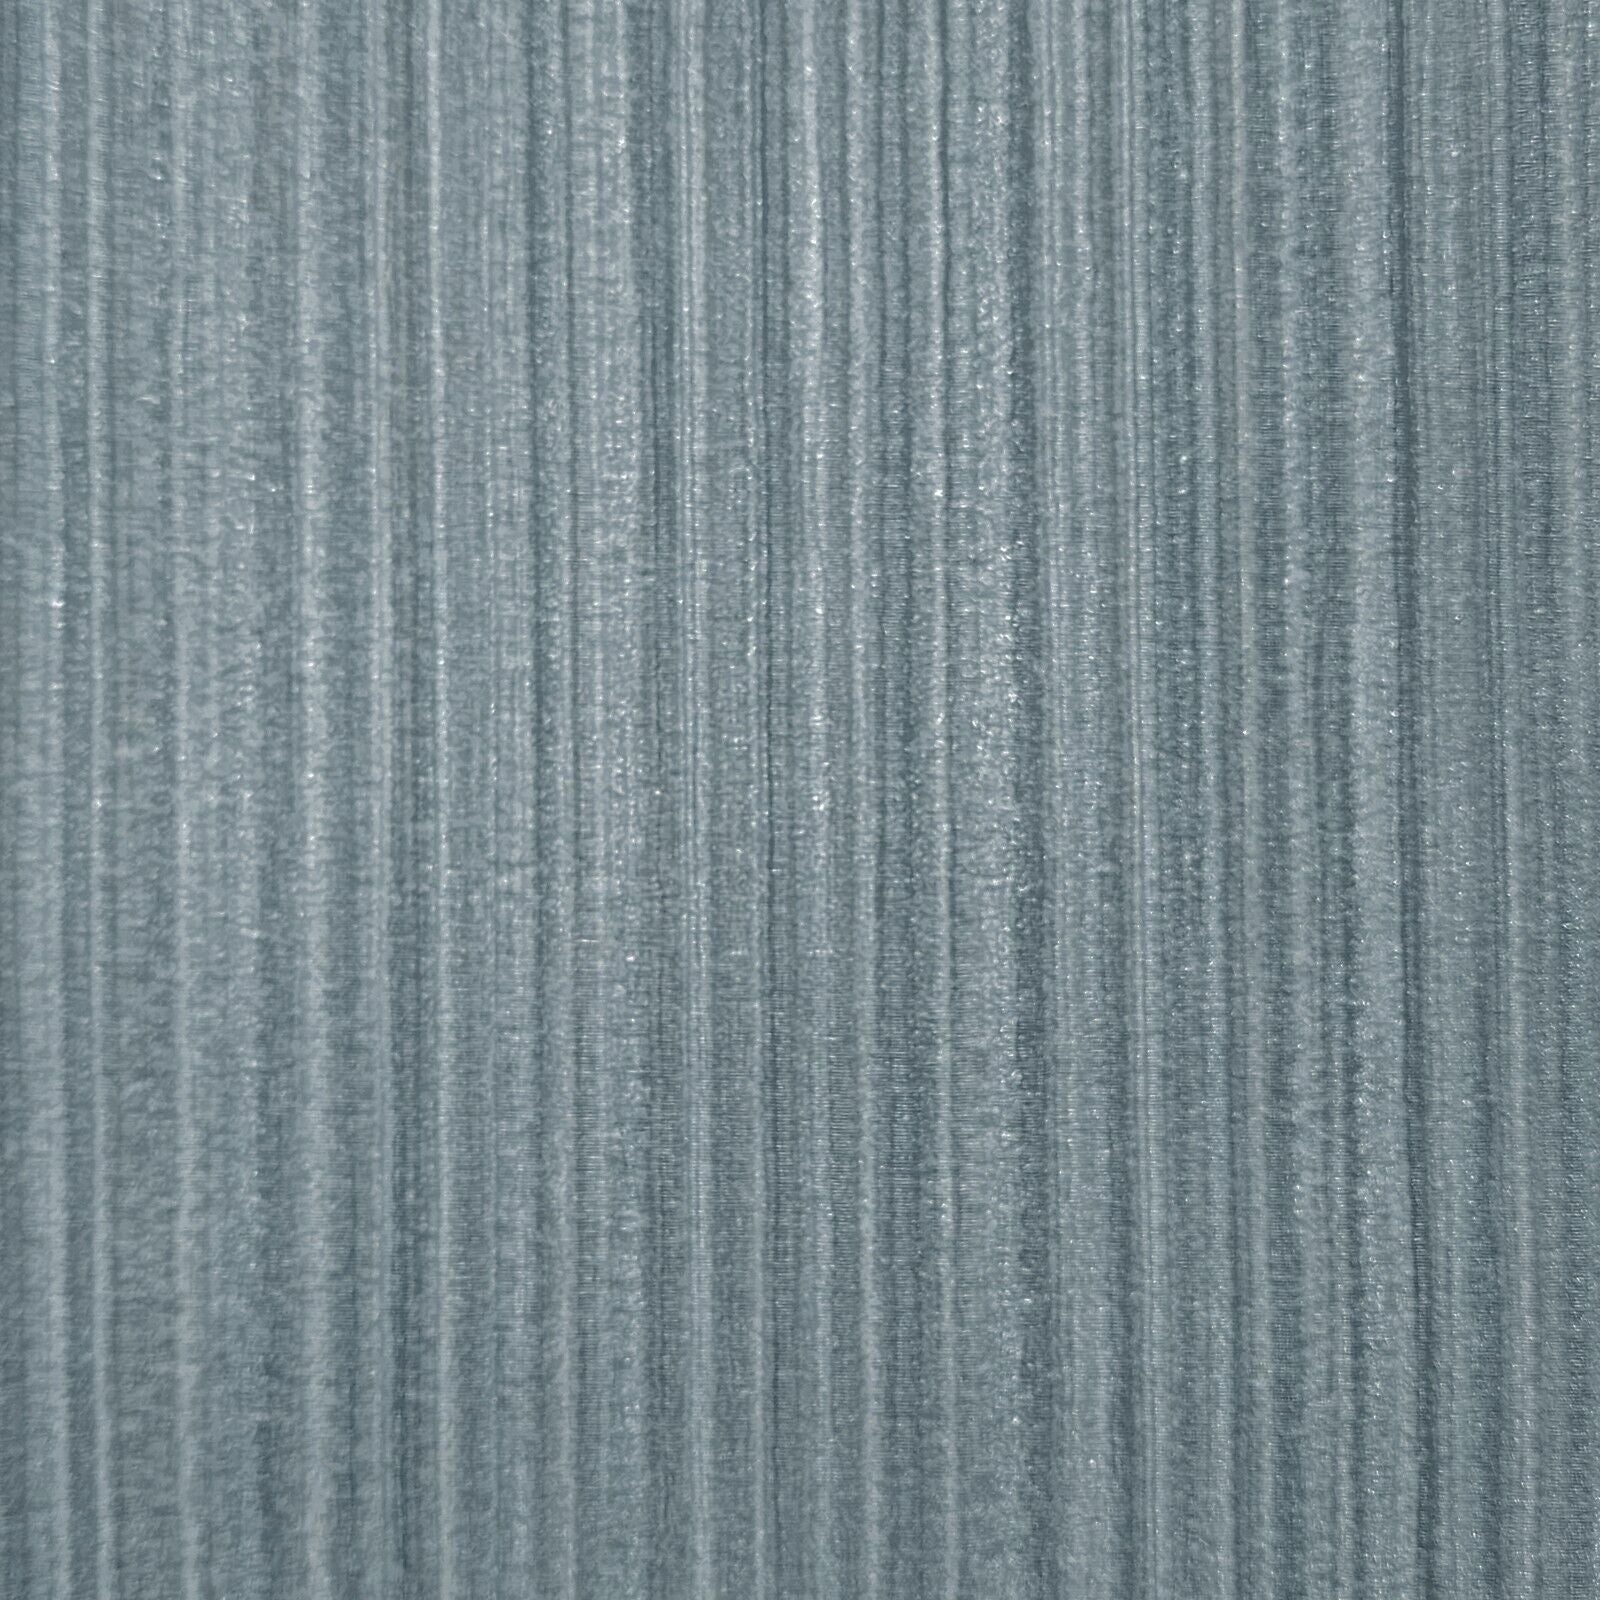 Z78017 Silver Gray Blue metallic textured faux fabric vertical 